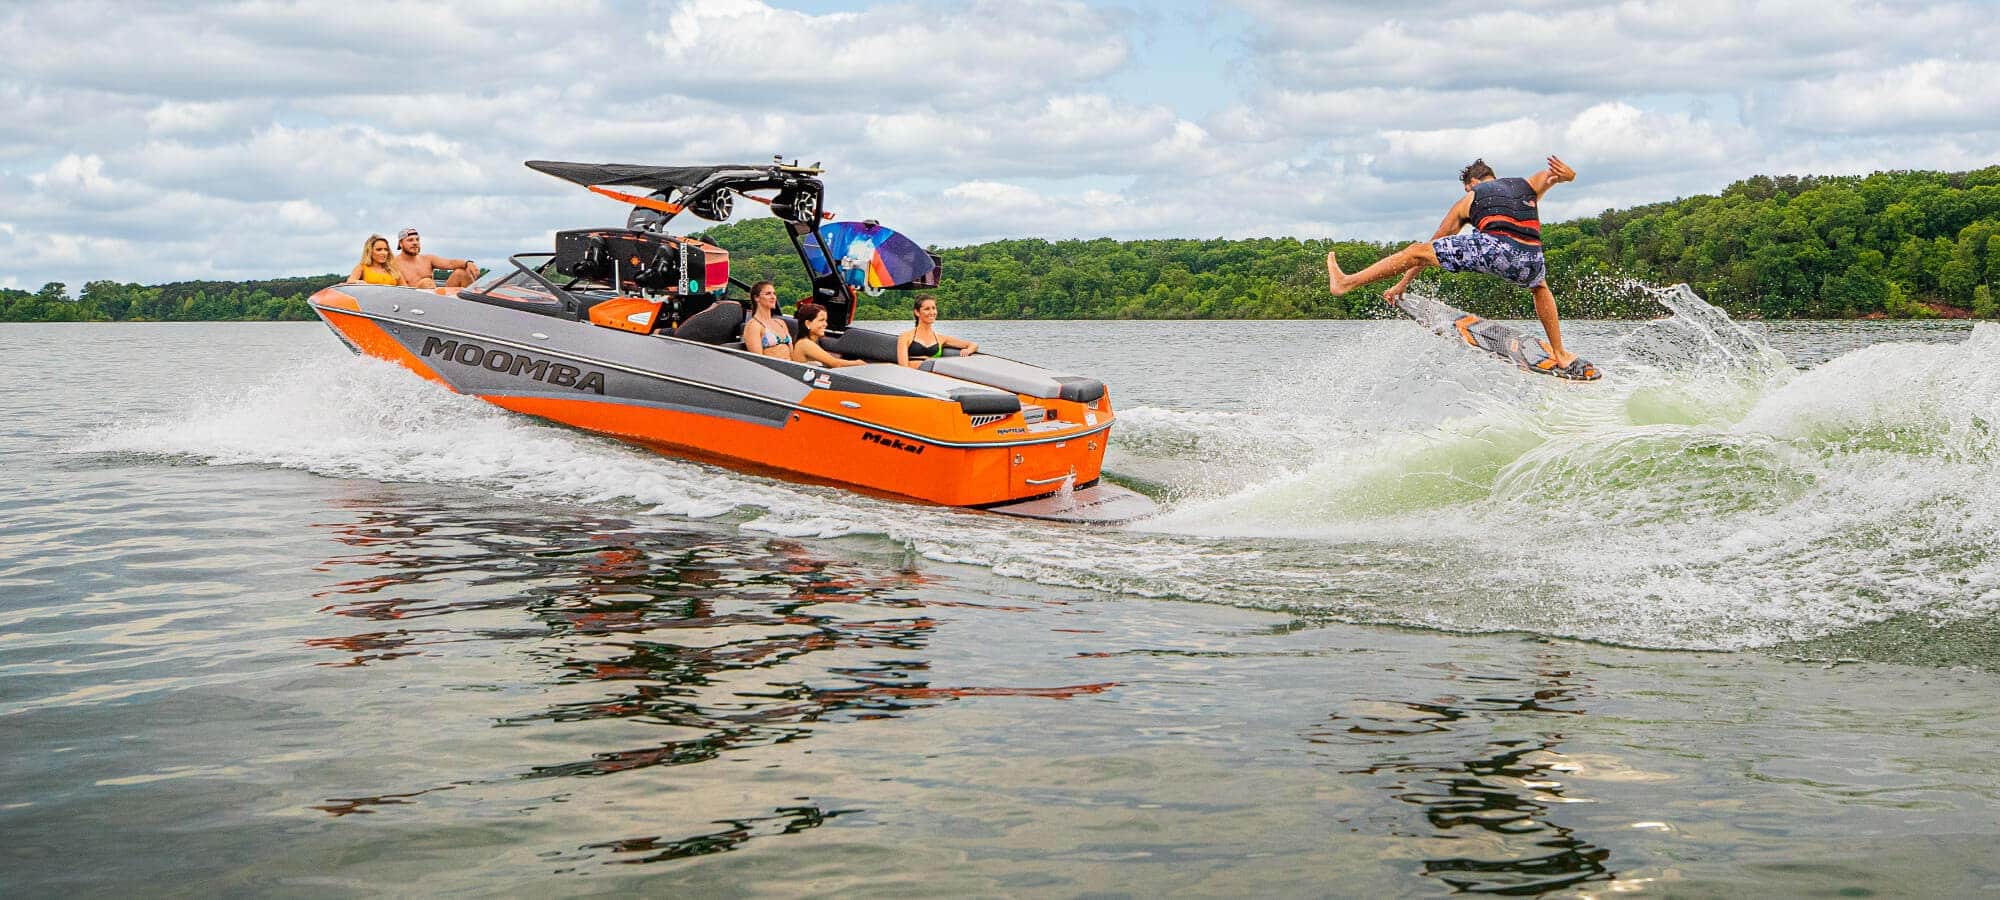 Waterskiing from a Moomba boat